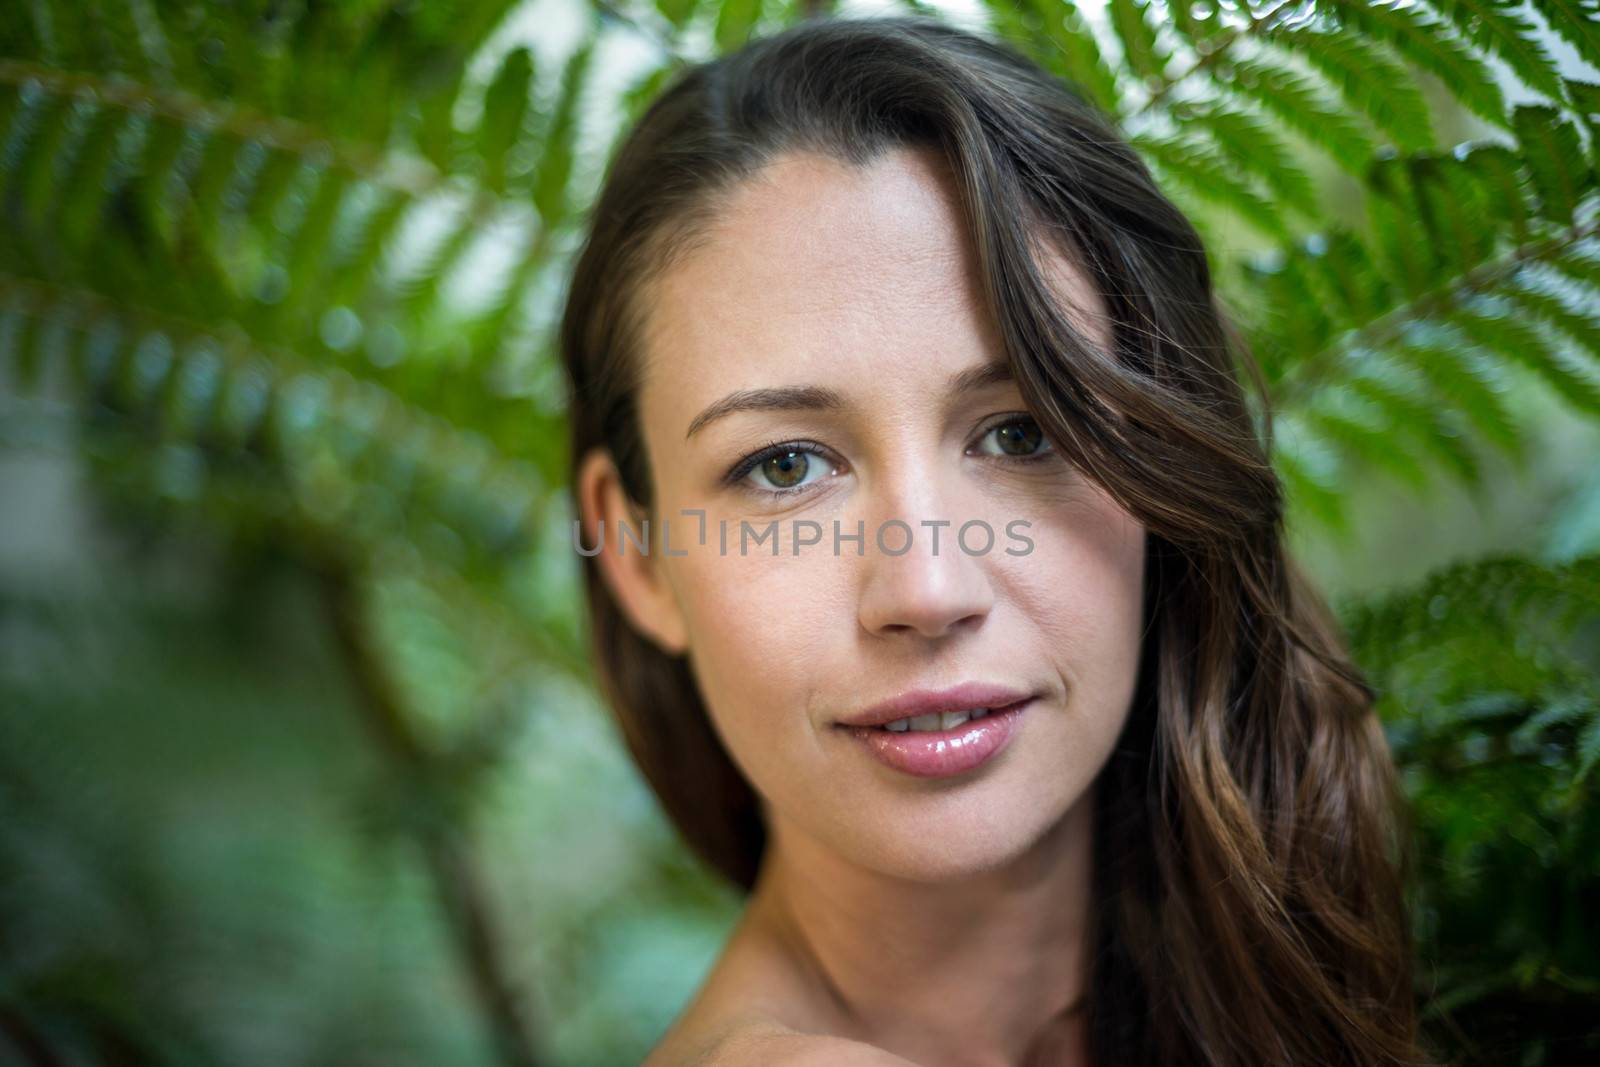 Portrait of beautiful woman standing outdoors against green plants